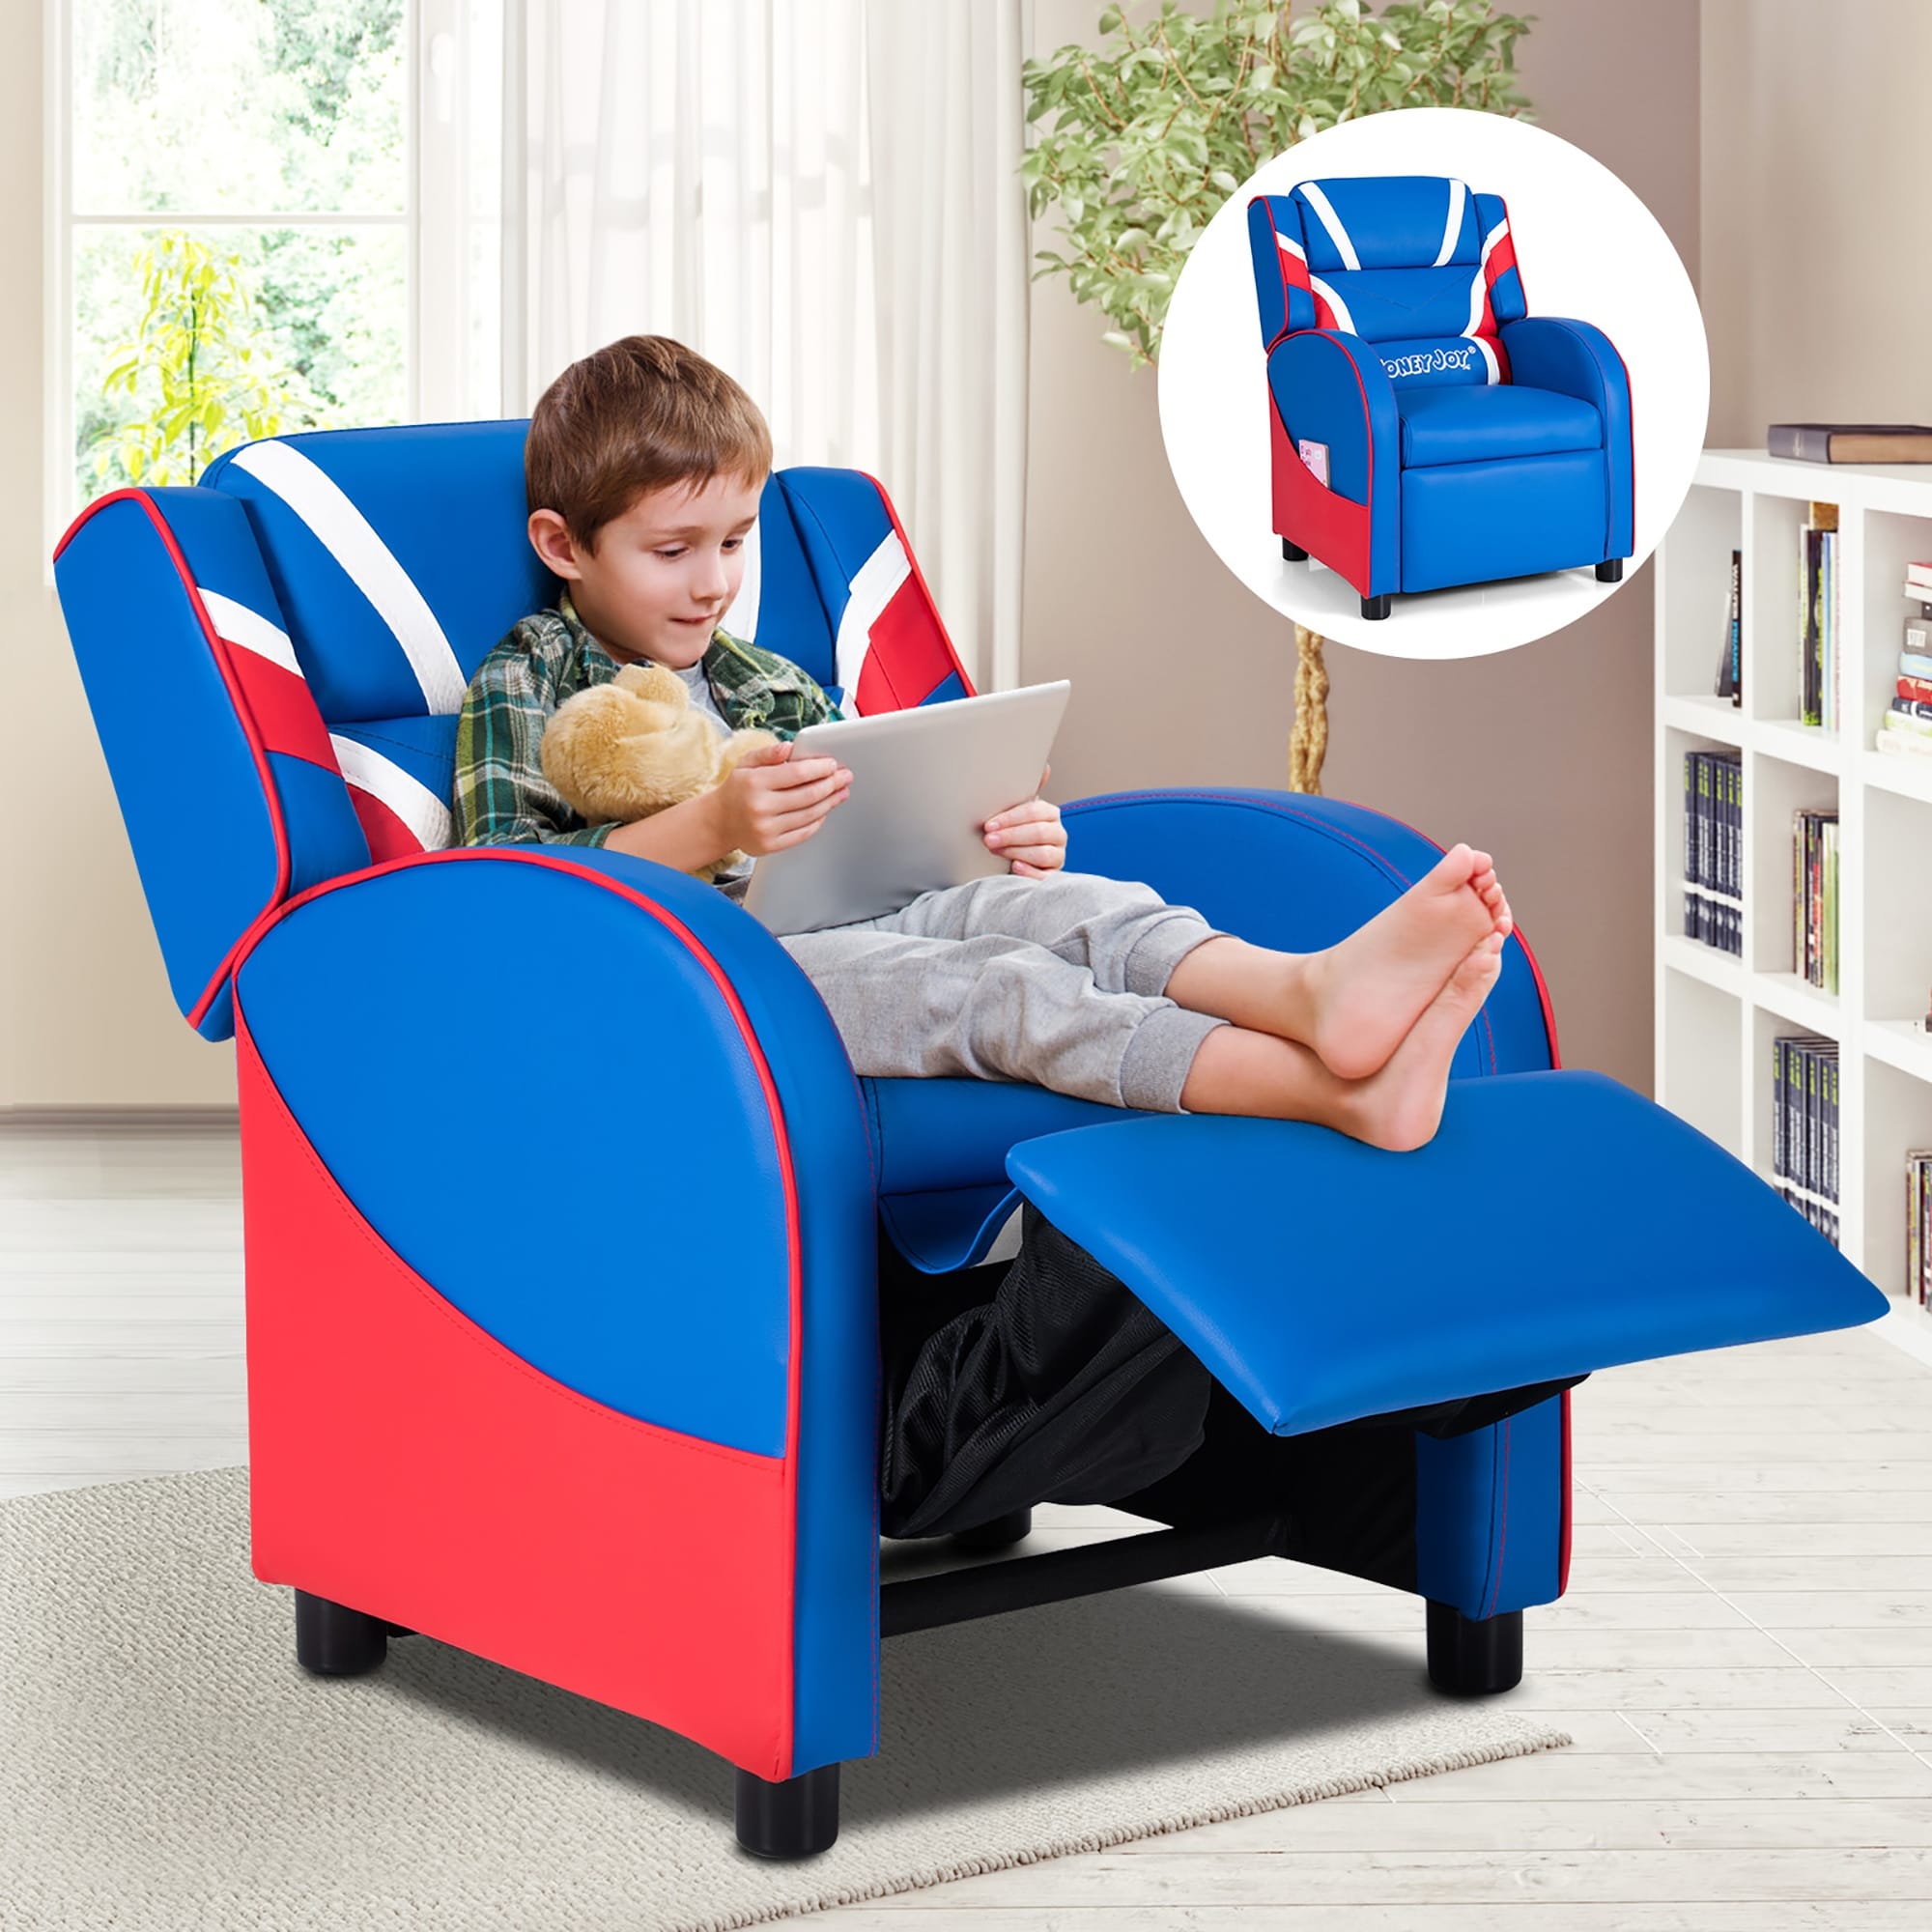 https://ak1.ostkcdn.com/images/products/is/images/direct/c7265a647b3d7d8b8bbe8cde53f5bd02b01ee1fc/Kids-Recliner-Chair-Gaming-Sofa-PU-Leather-Armchair-w-Side-Pockets.jpg